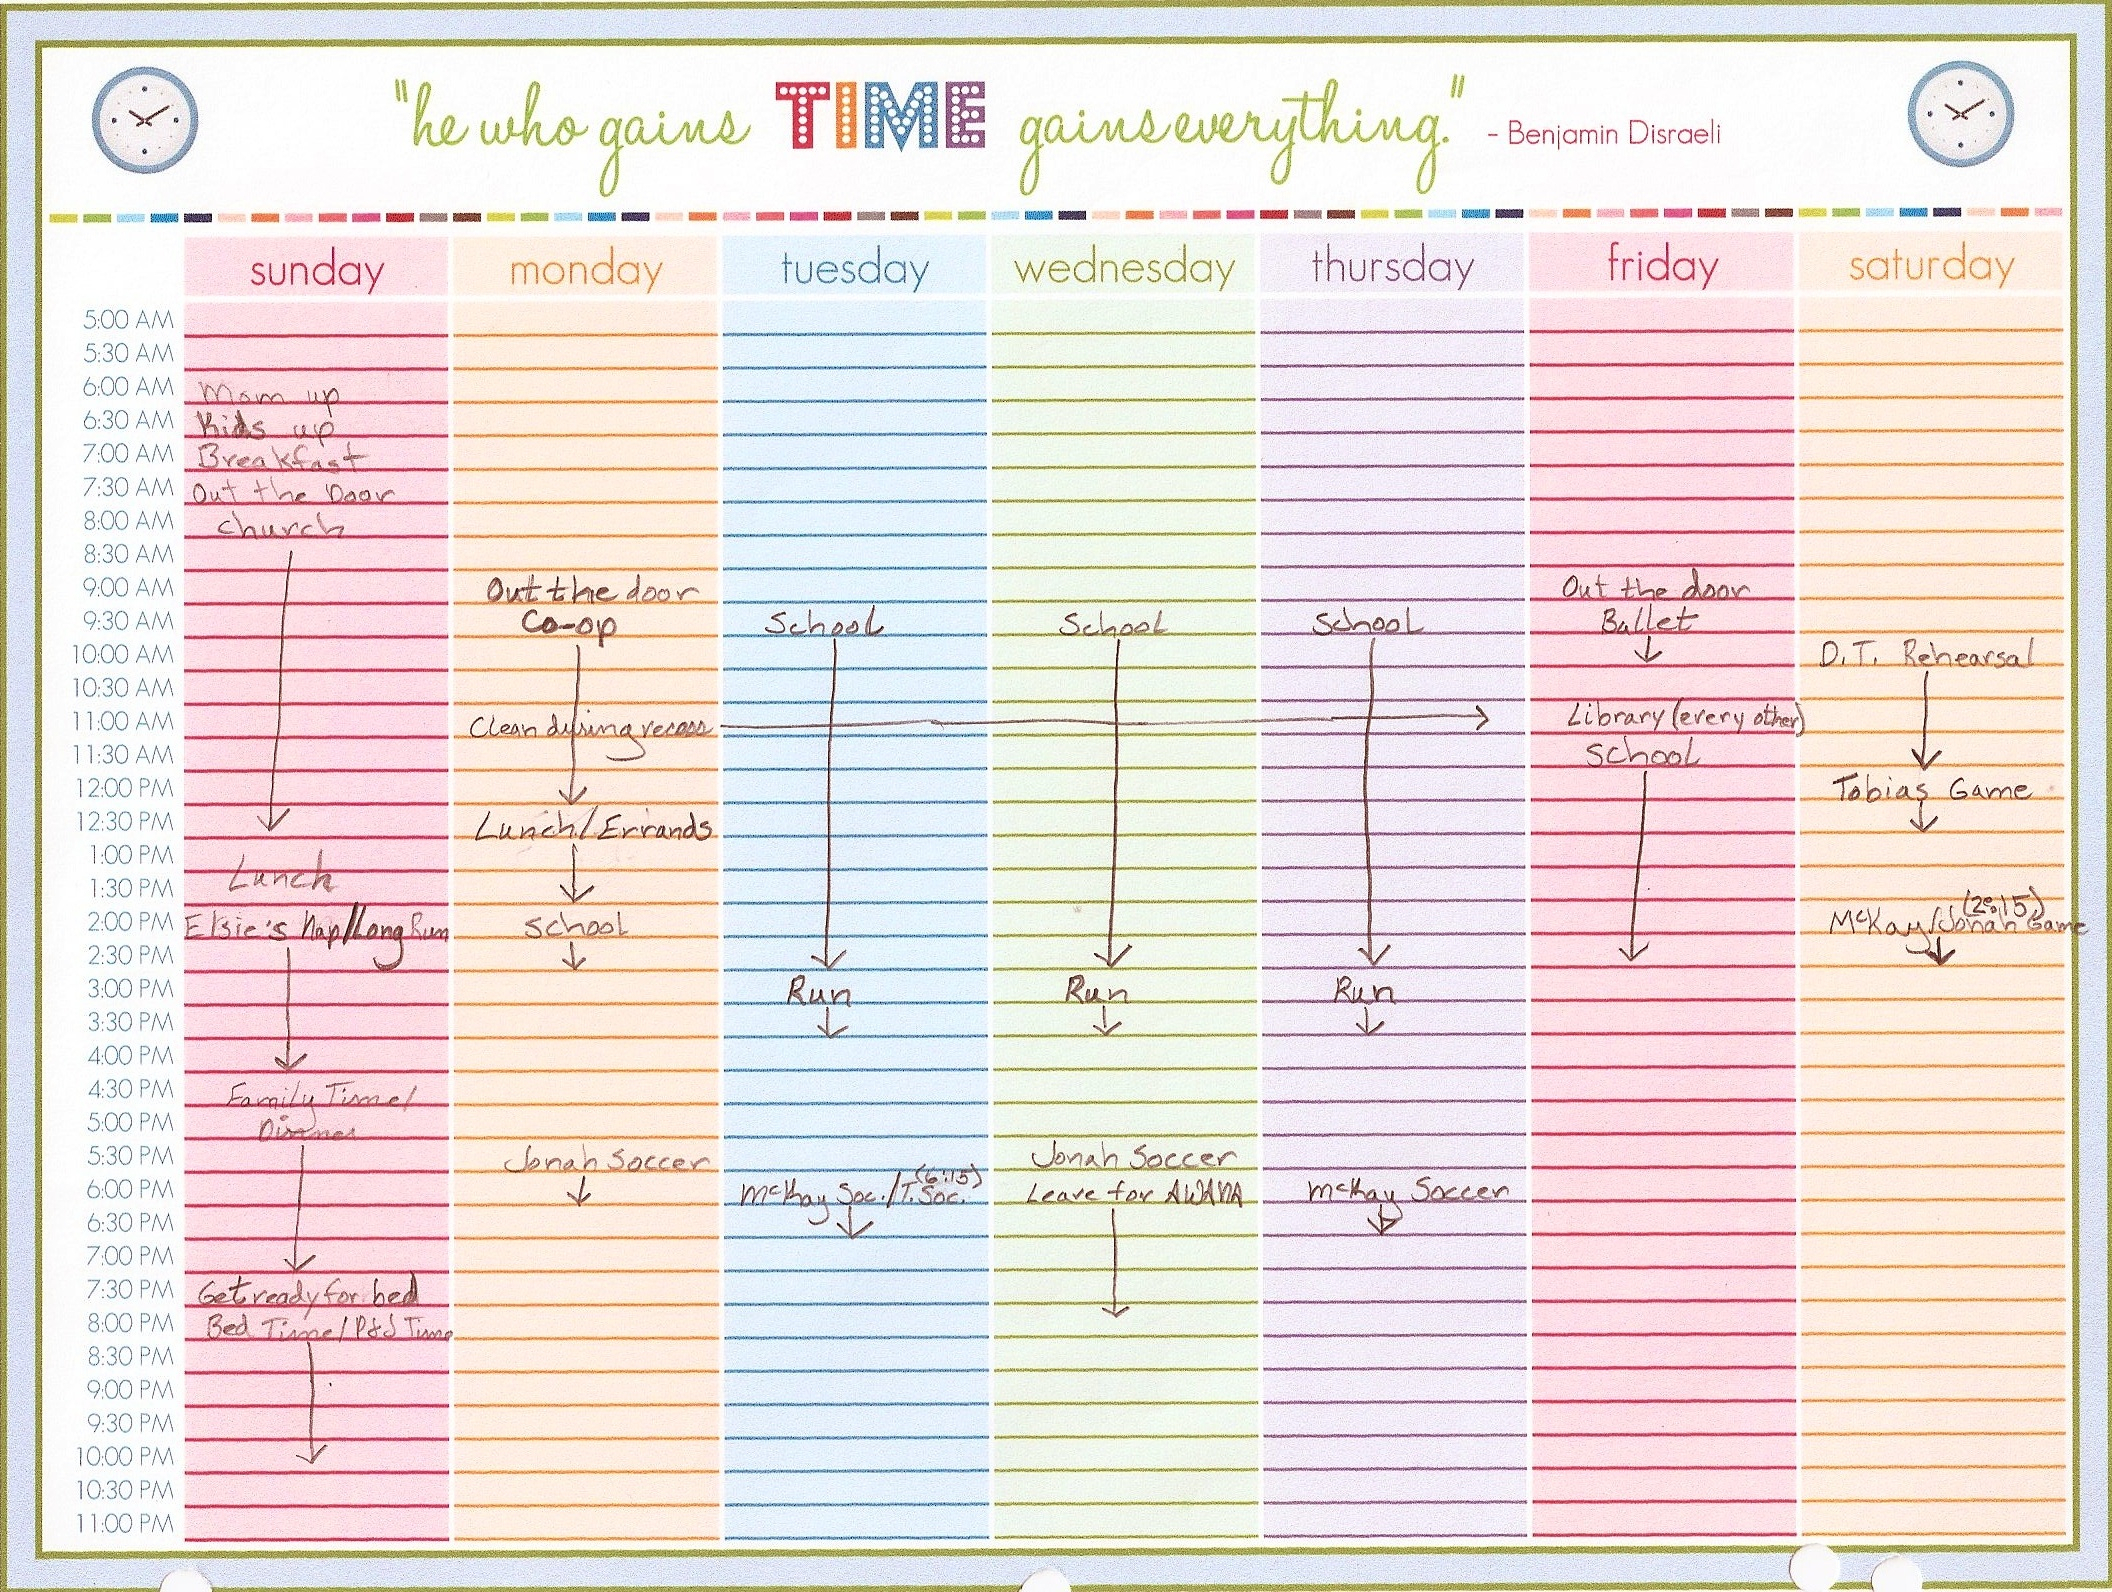 Free Calendar Template With Time Slots | Calendar Template